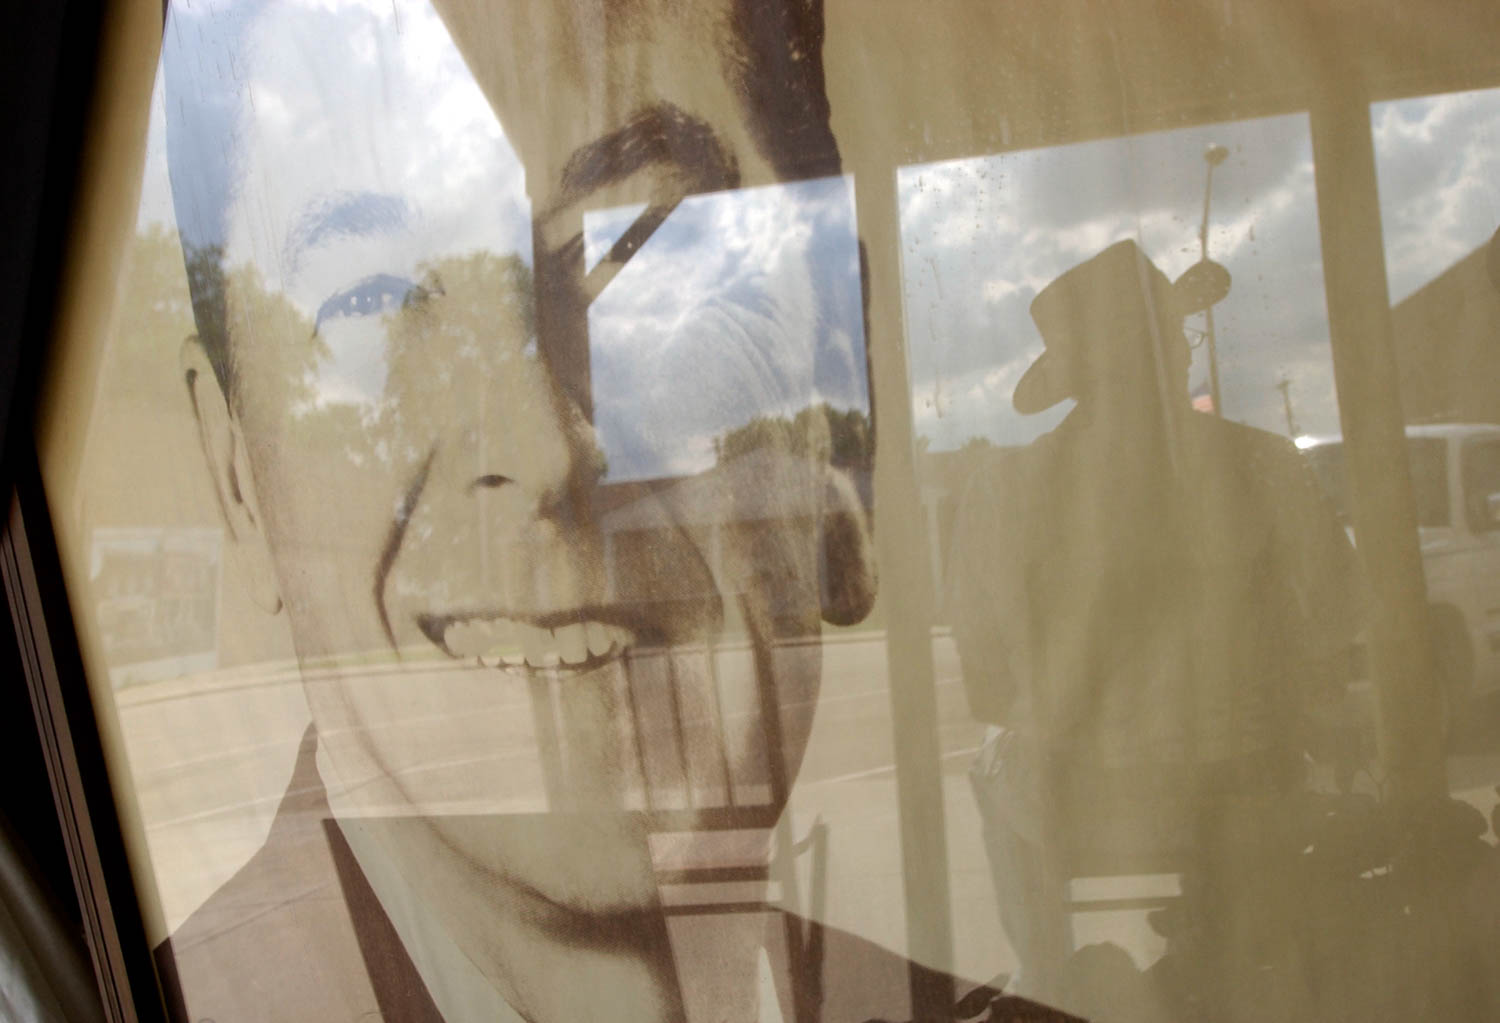 The reflection of Tim McLoughlin of Tampico Ill., casts a silhouette next to a large portrait of former President Ronald Reagan in the window of the Tampico historical society, Sunday afternoon. Reagan was born in Tampico, on Feb. 6, 1911 and died Saturday at the age of 93. (Todd Mizener - Dispatch/Argus)